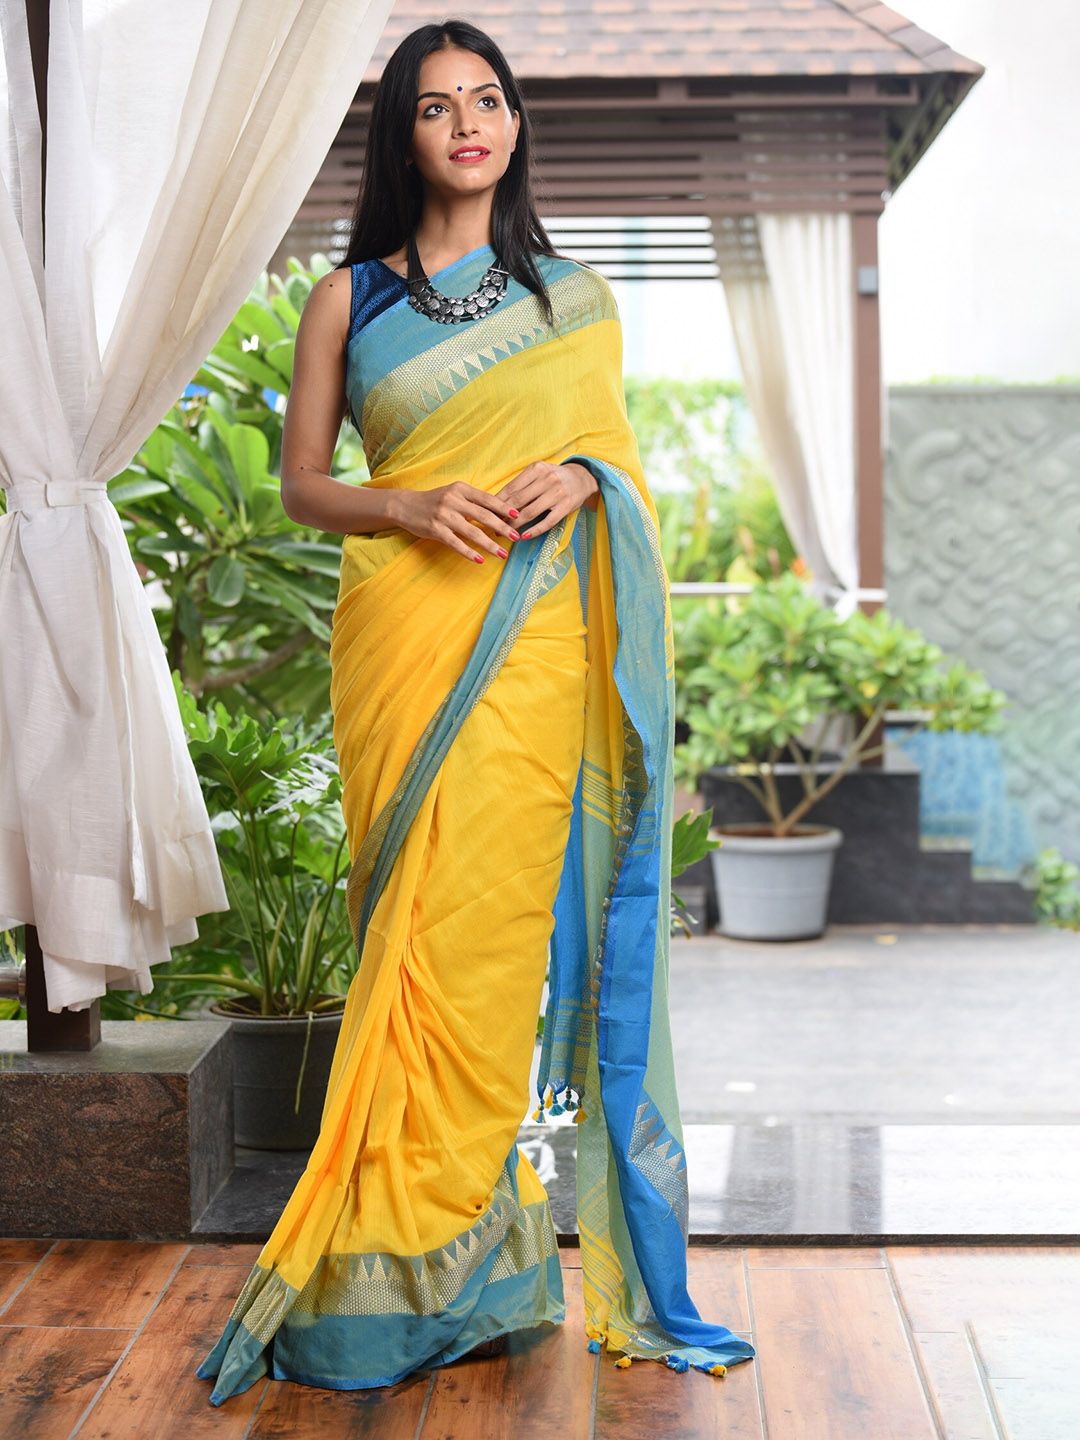 Very Much Indian Woven Design Zari Pure Cotton Paithani Saree Price in India